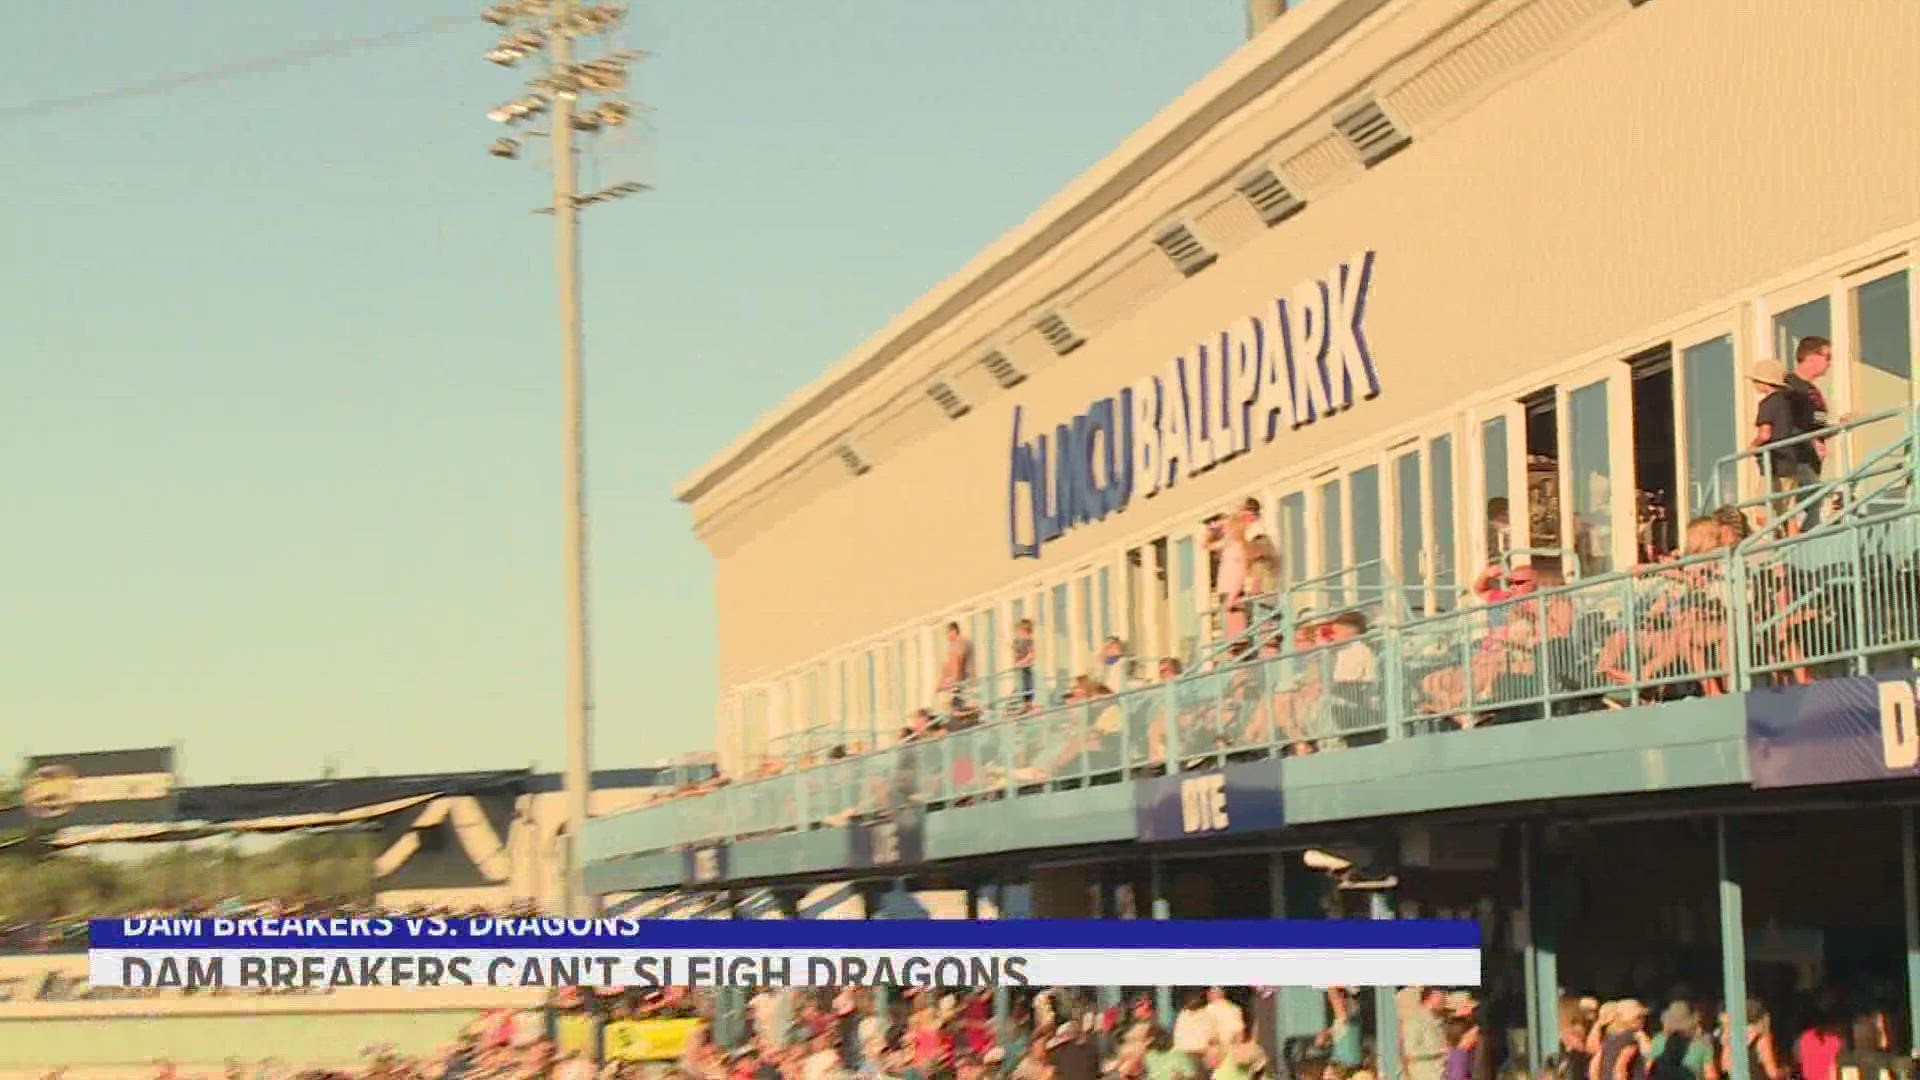 The West Michigan Whitecaps turned into the West Michigan Dam Breakers on Saturday night to raise awareness for the Grand River Restoration project.